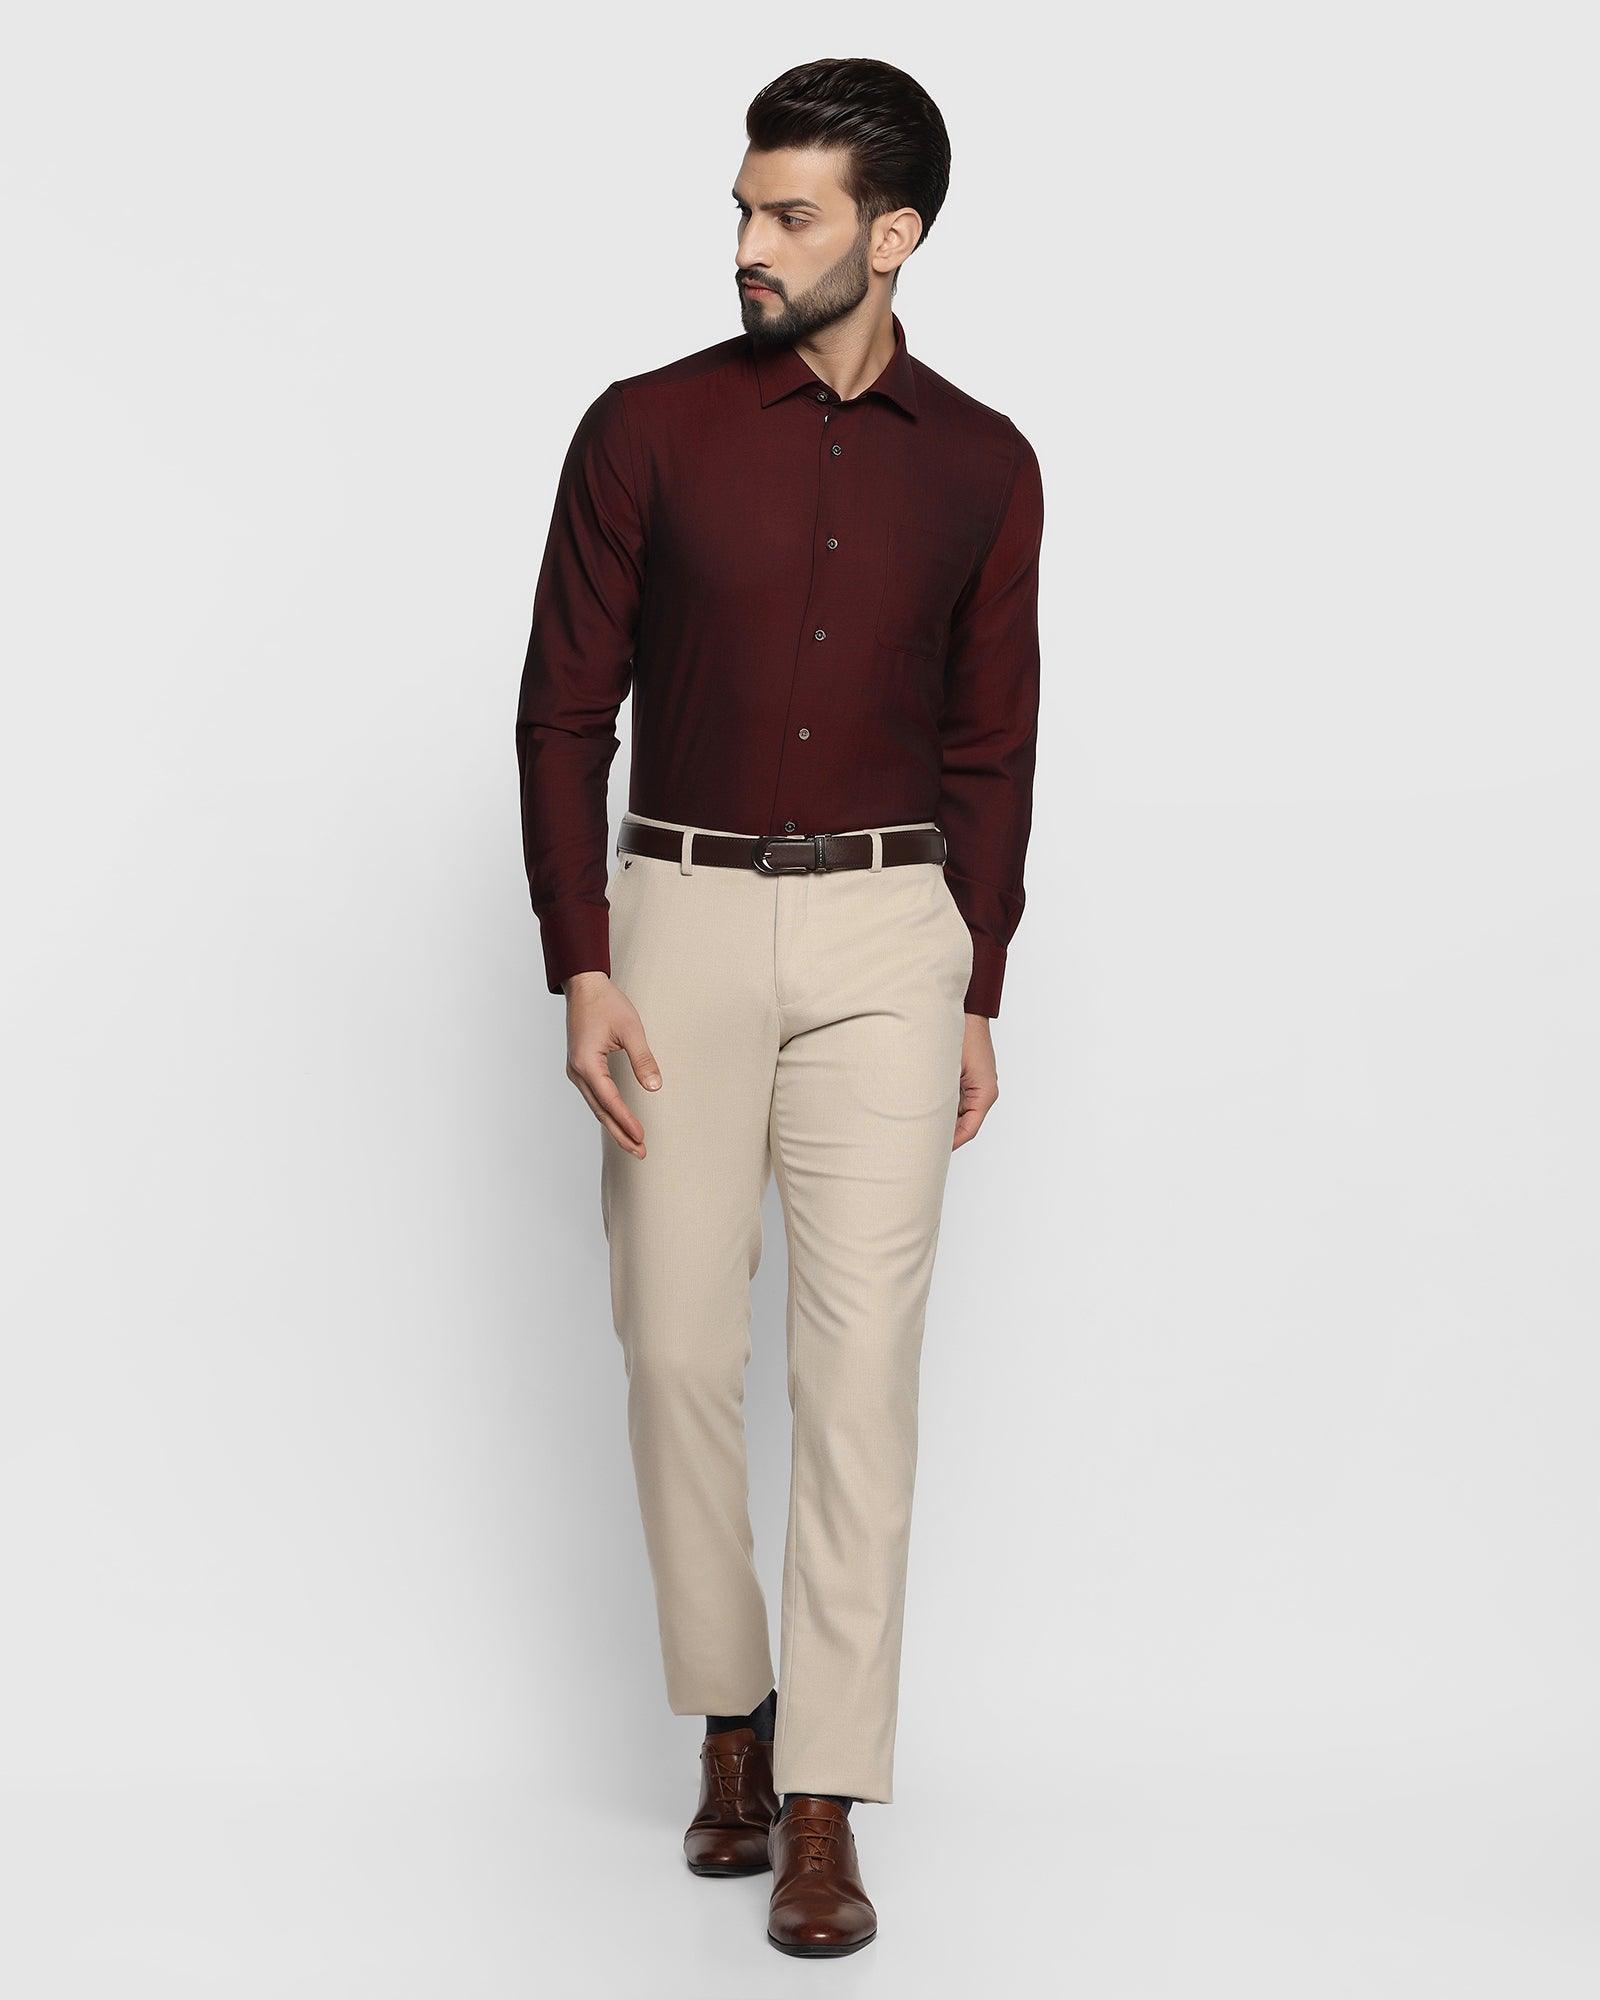 Textured Formal Shirt In Wine (Mayim)